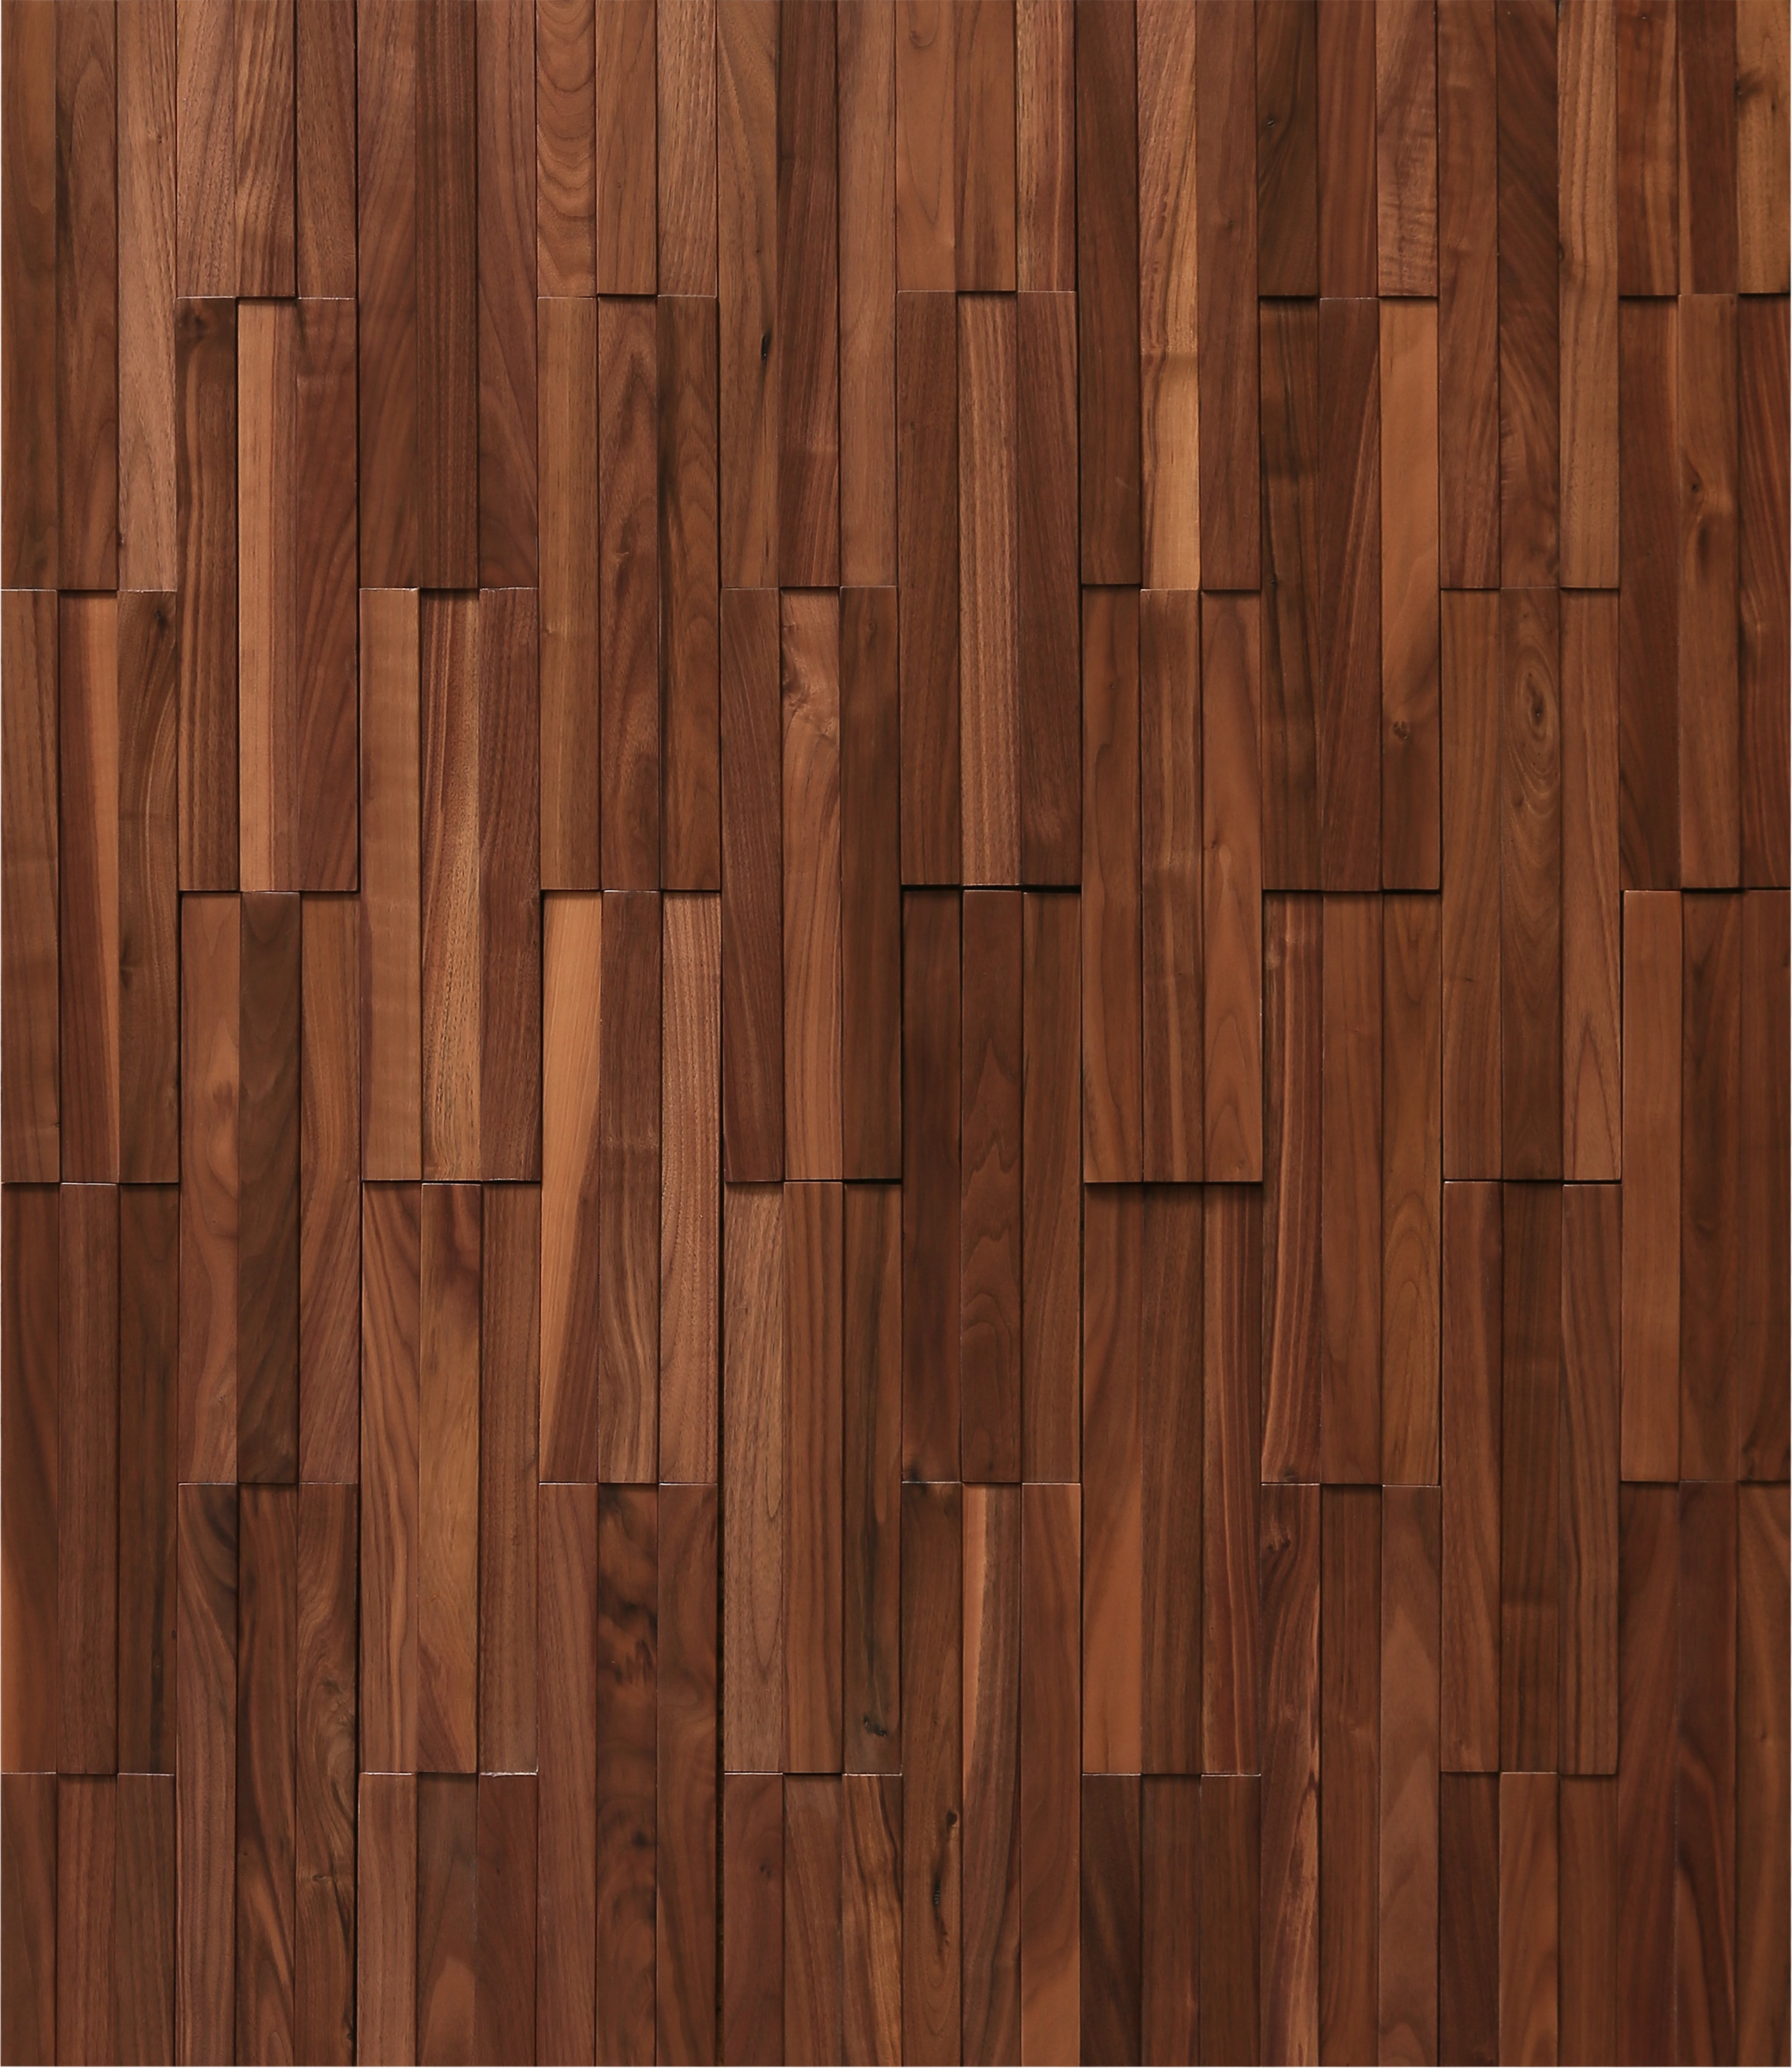 duchateau inceptiv kuadra american walnut three dimensional wall natural wood panel conversion varnish for interior use distributed by surface group international